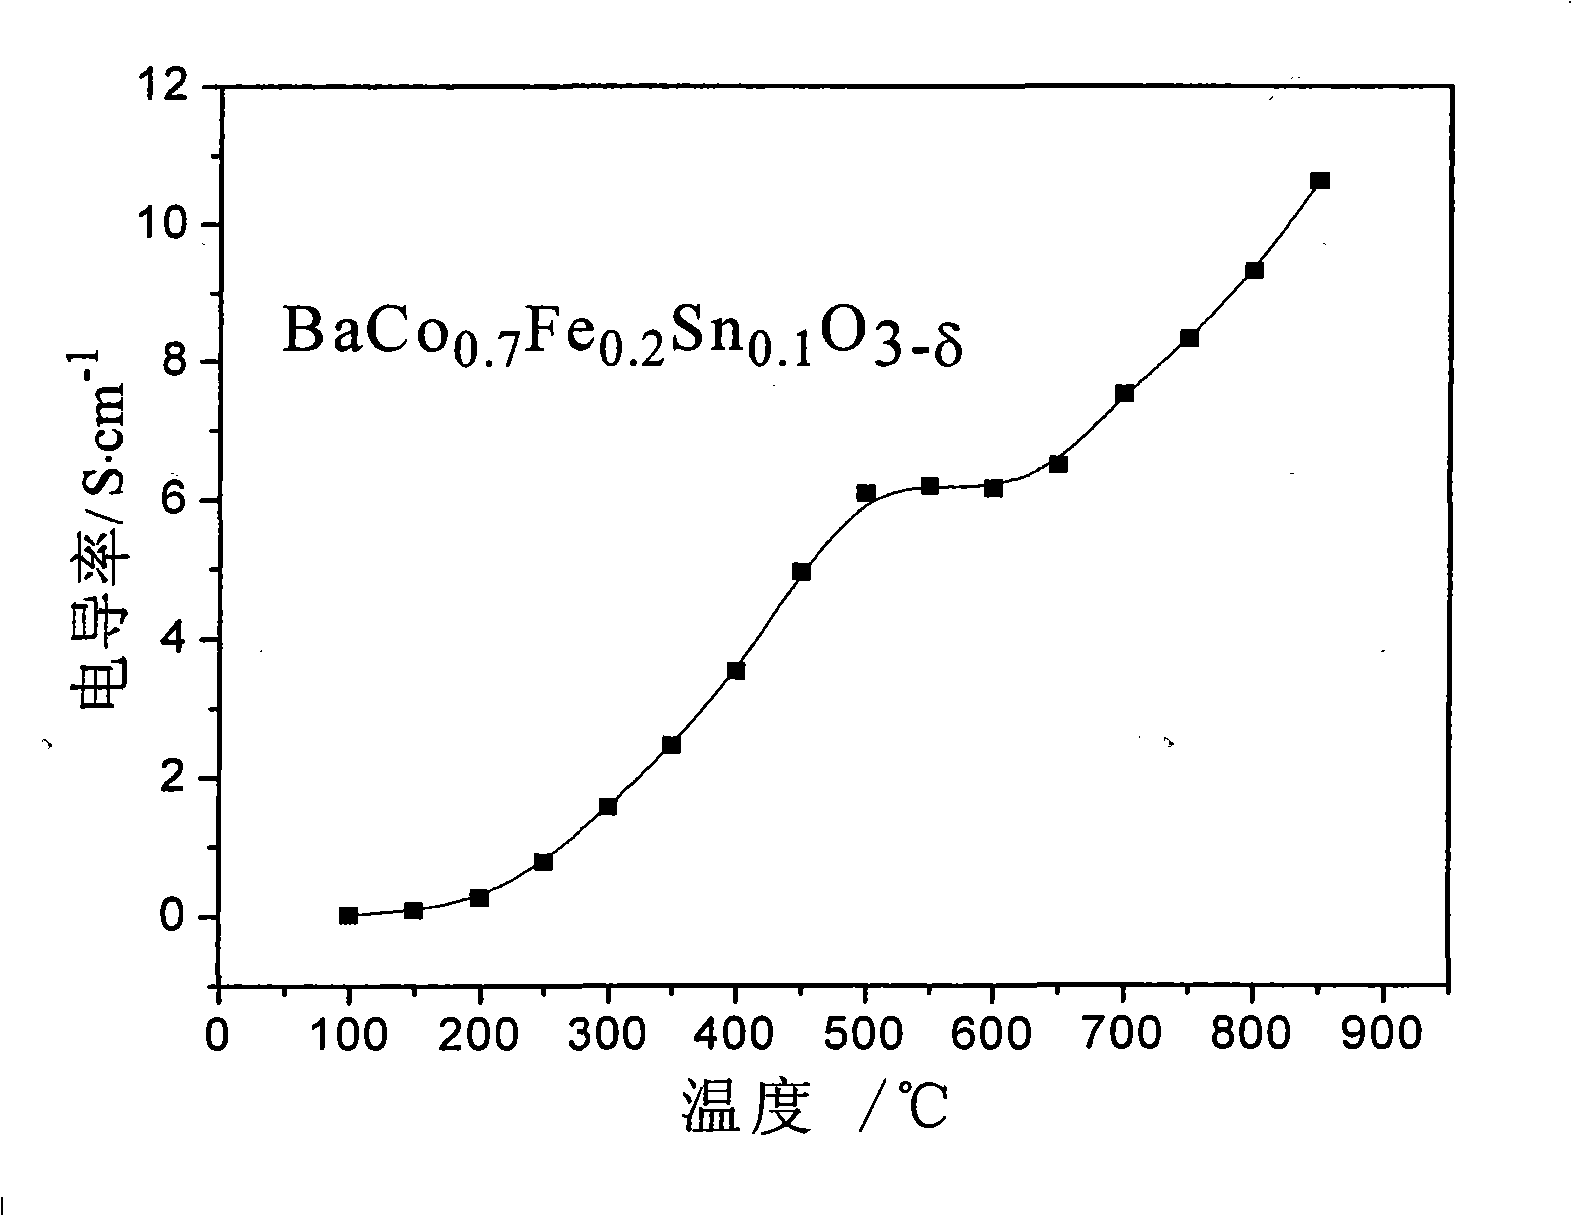 BaCoO3 based perovskite type ceramic oxygen-permeable membrane material with Sn, Fe doped at B position